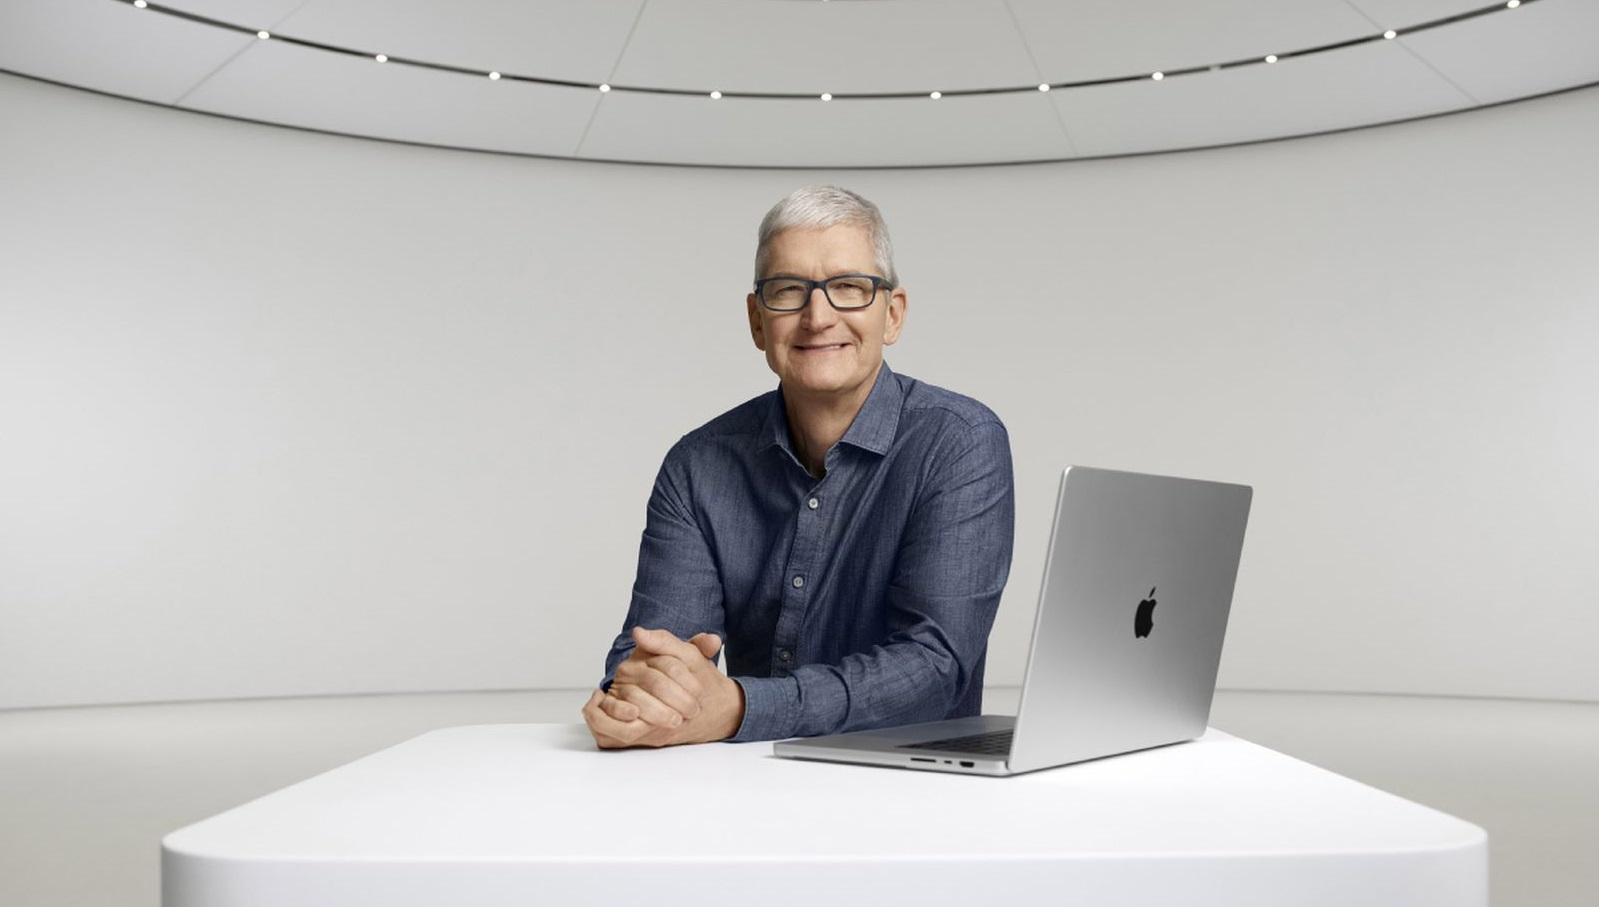 Tim Cook will voluntarily cut his own compensation package by about $50 million